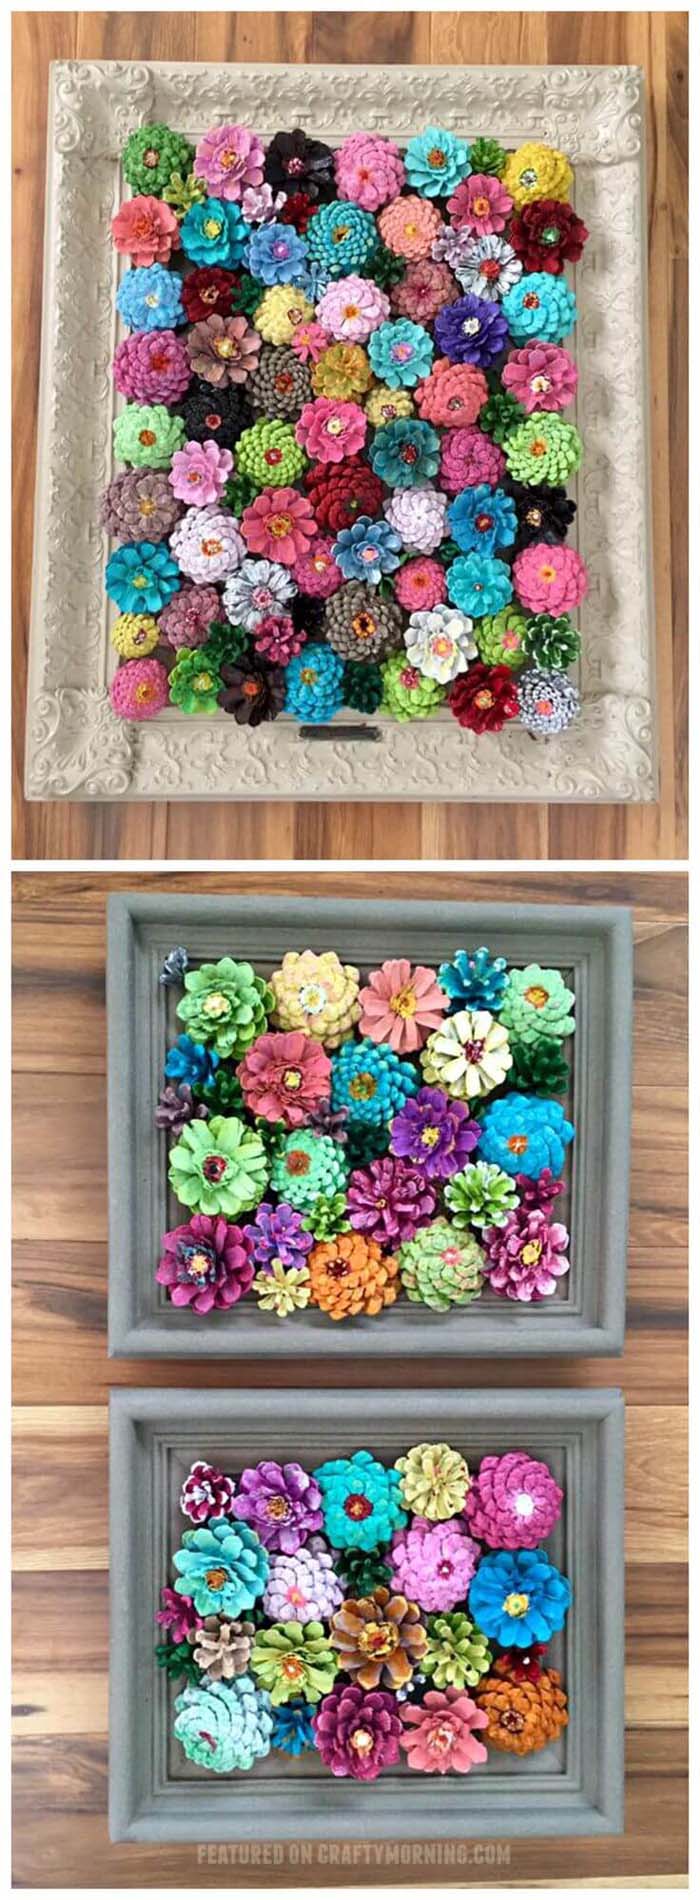 Spring Blooms With Pinecones